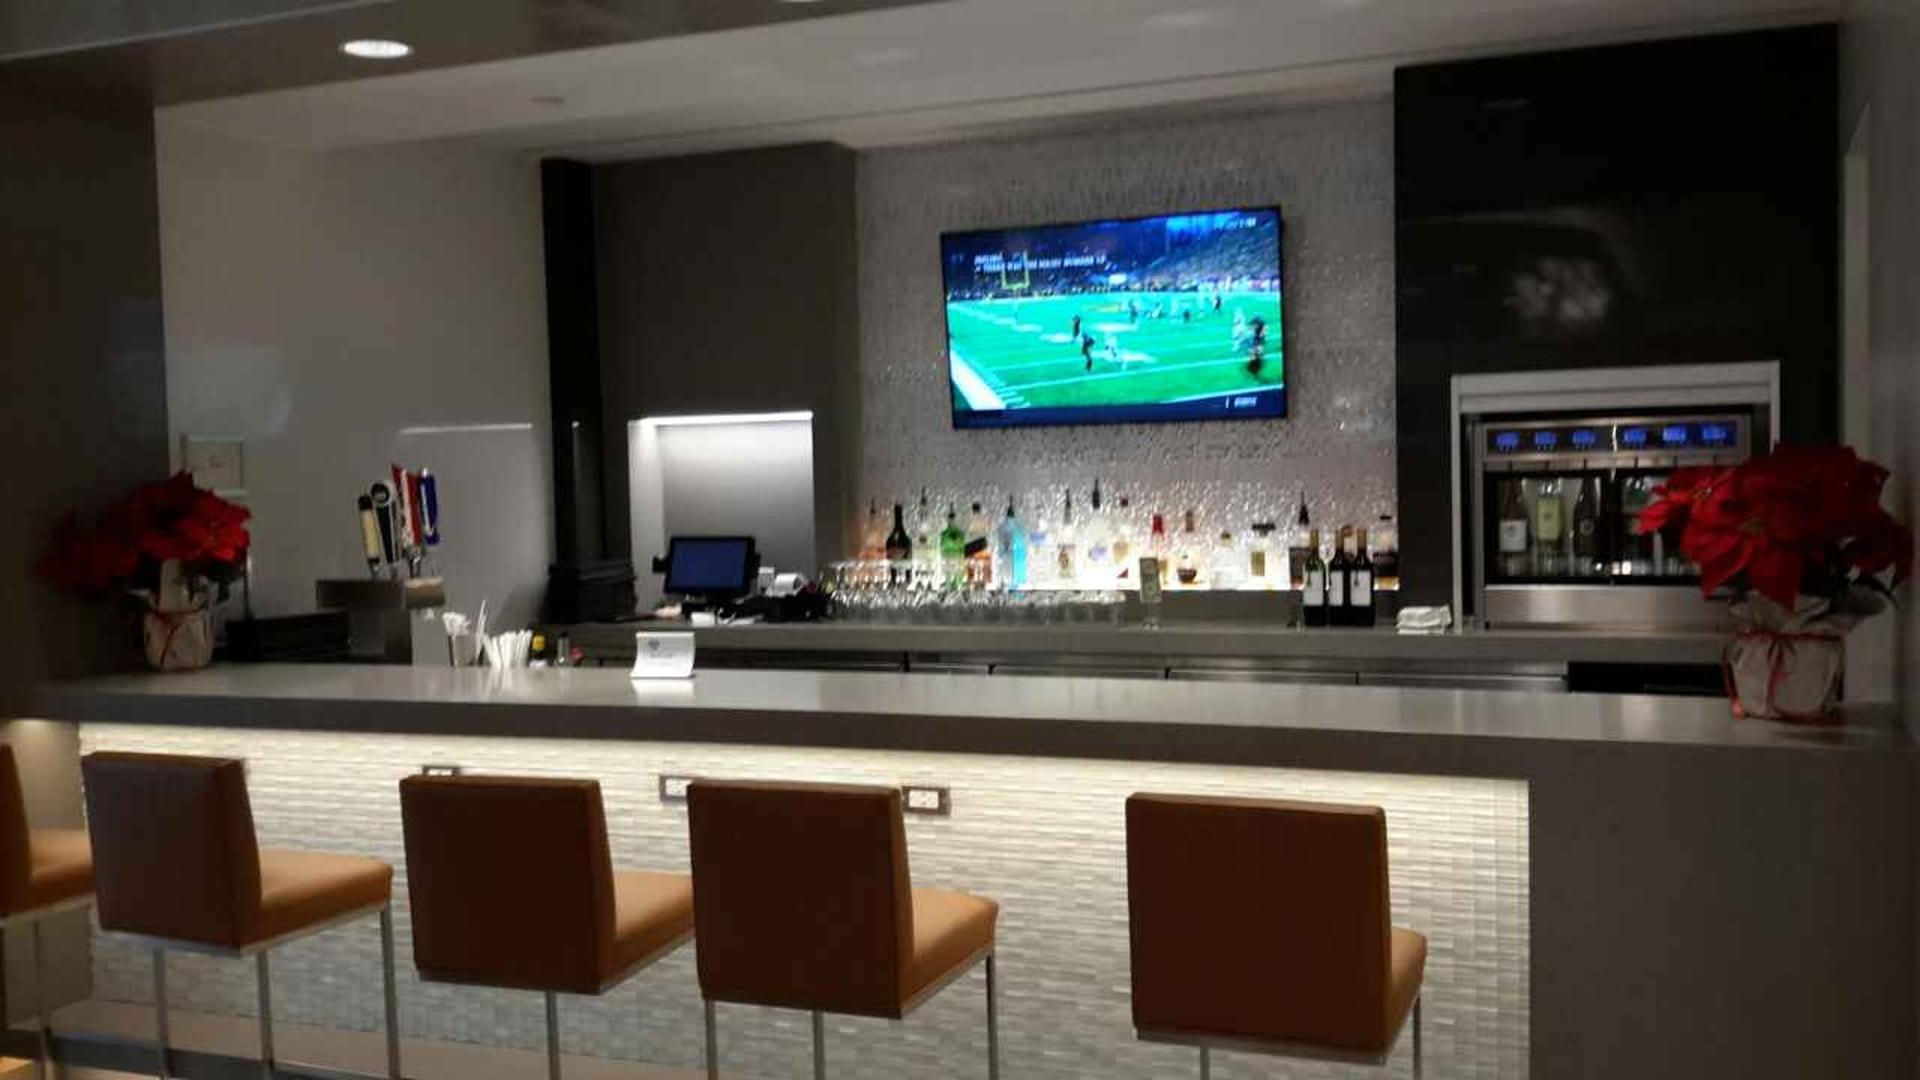 American Airlines Admirals Club image 5 of 9